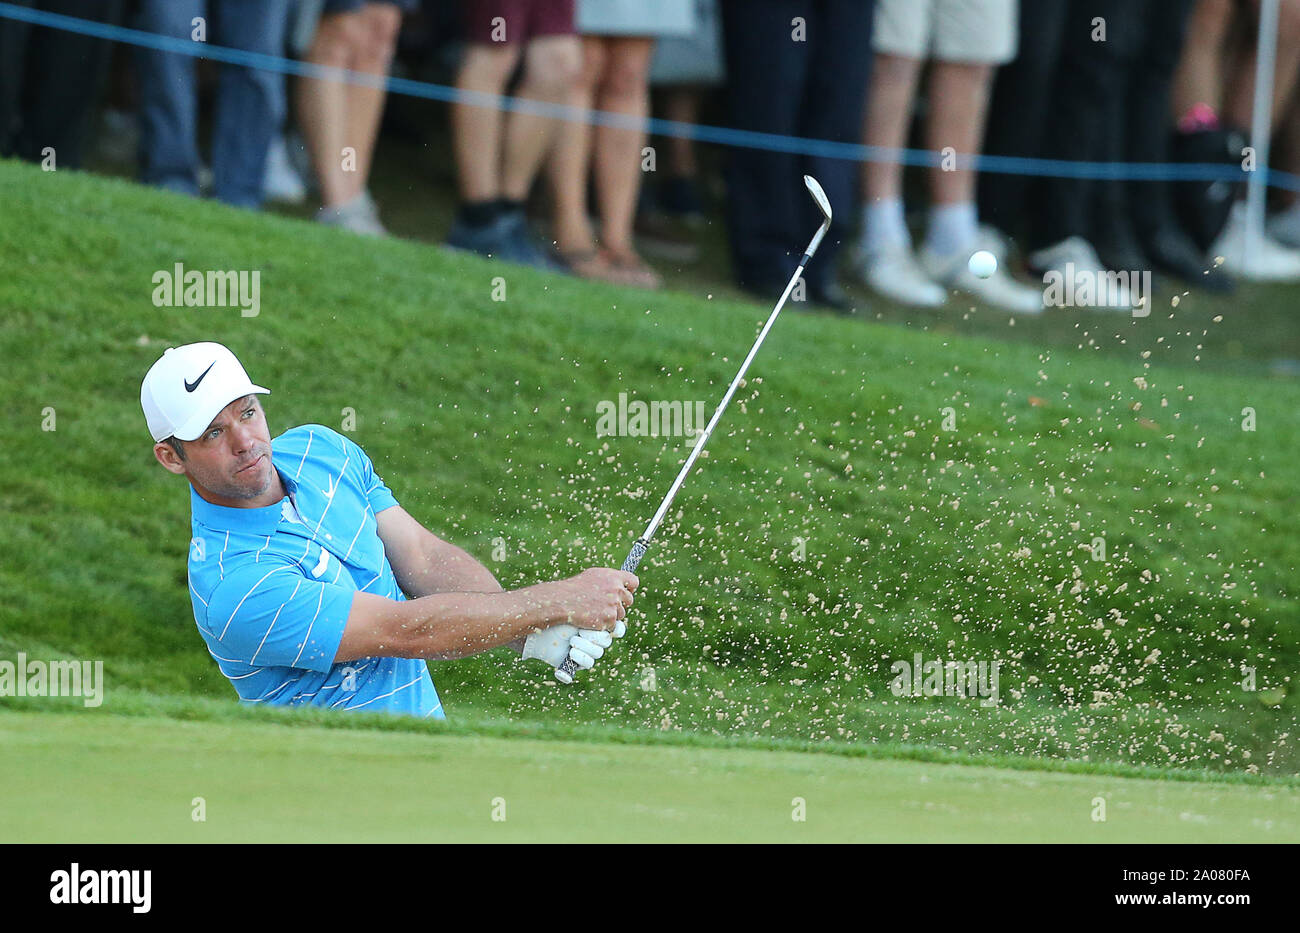 Wentworth Golf Club, Virginia Water, UK. 19 September 2019. Paul Casey of England plays a bunker shot on the 18th hole which goes into the water hazard during Day 1 at the BMW PGA Championship. Editorial use only. Credit: Paul Terry/Alamy. Credit: Paul Terry Photo/Alamy Live News Stock Photo